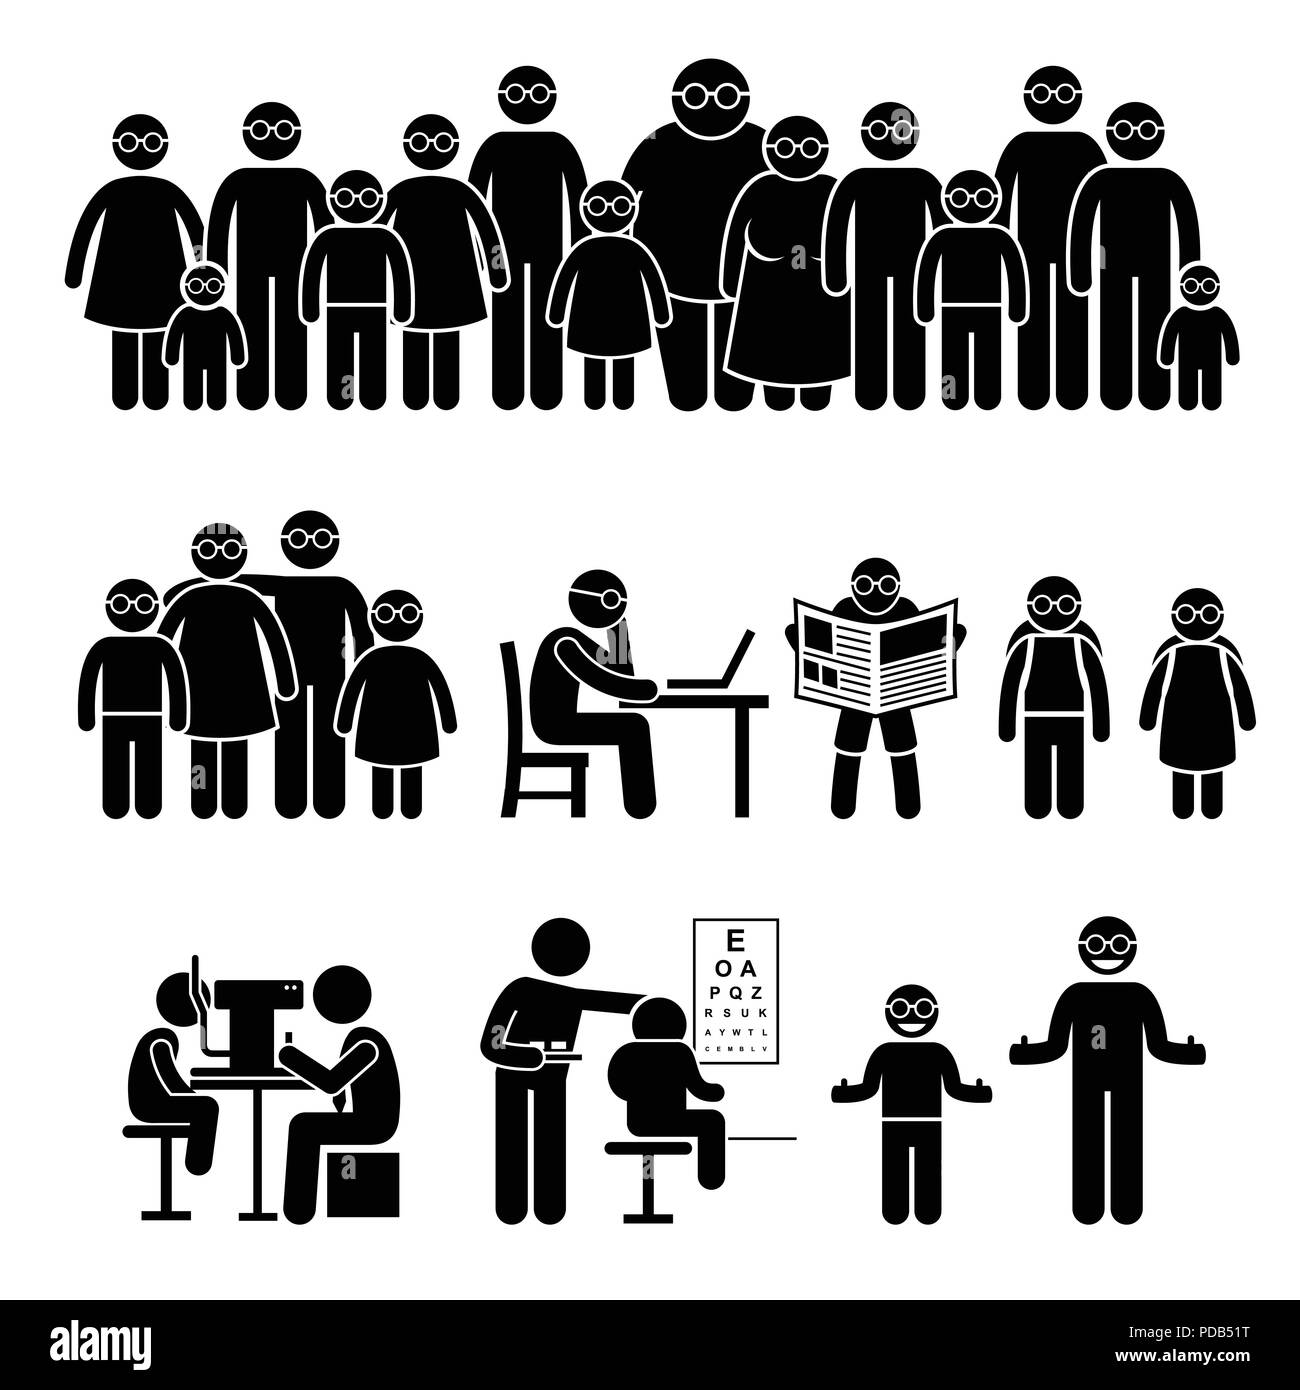 People Children Family Wearing Glasses Stick Figure Pictogram Icons Stock Vector